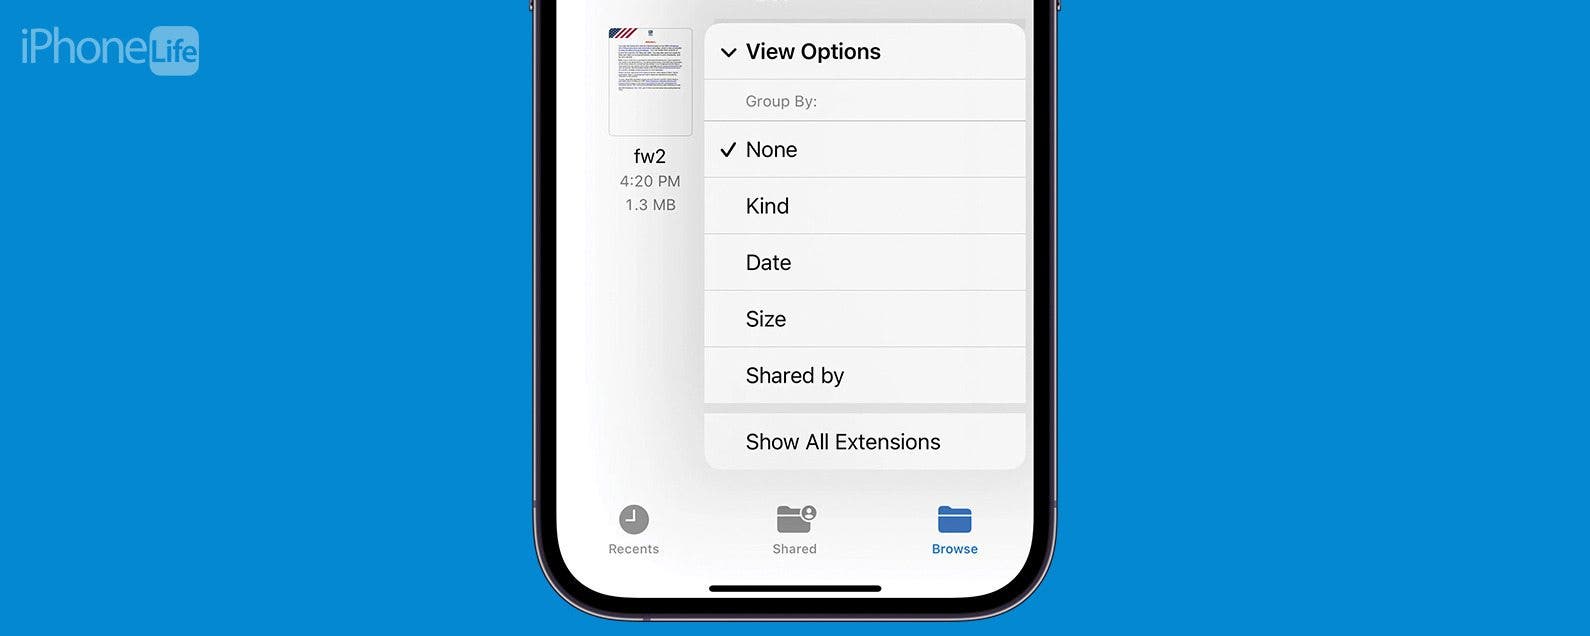 2 ways to view file extensions in the Files app on iPhone & iPad